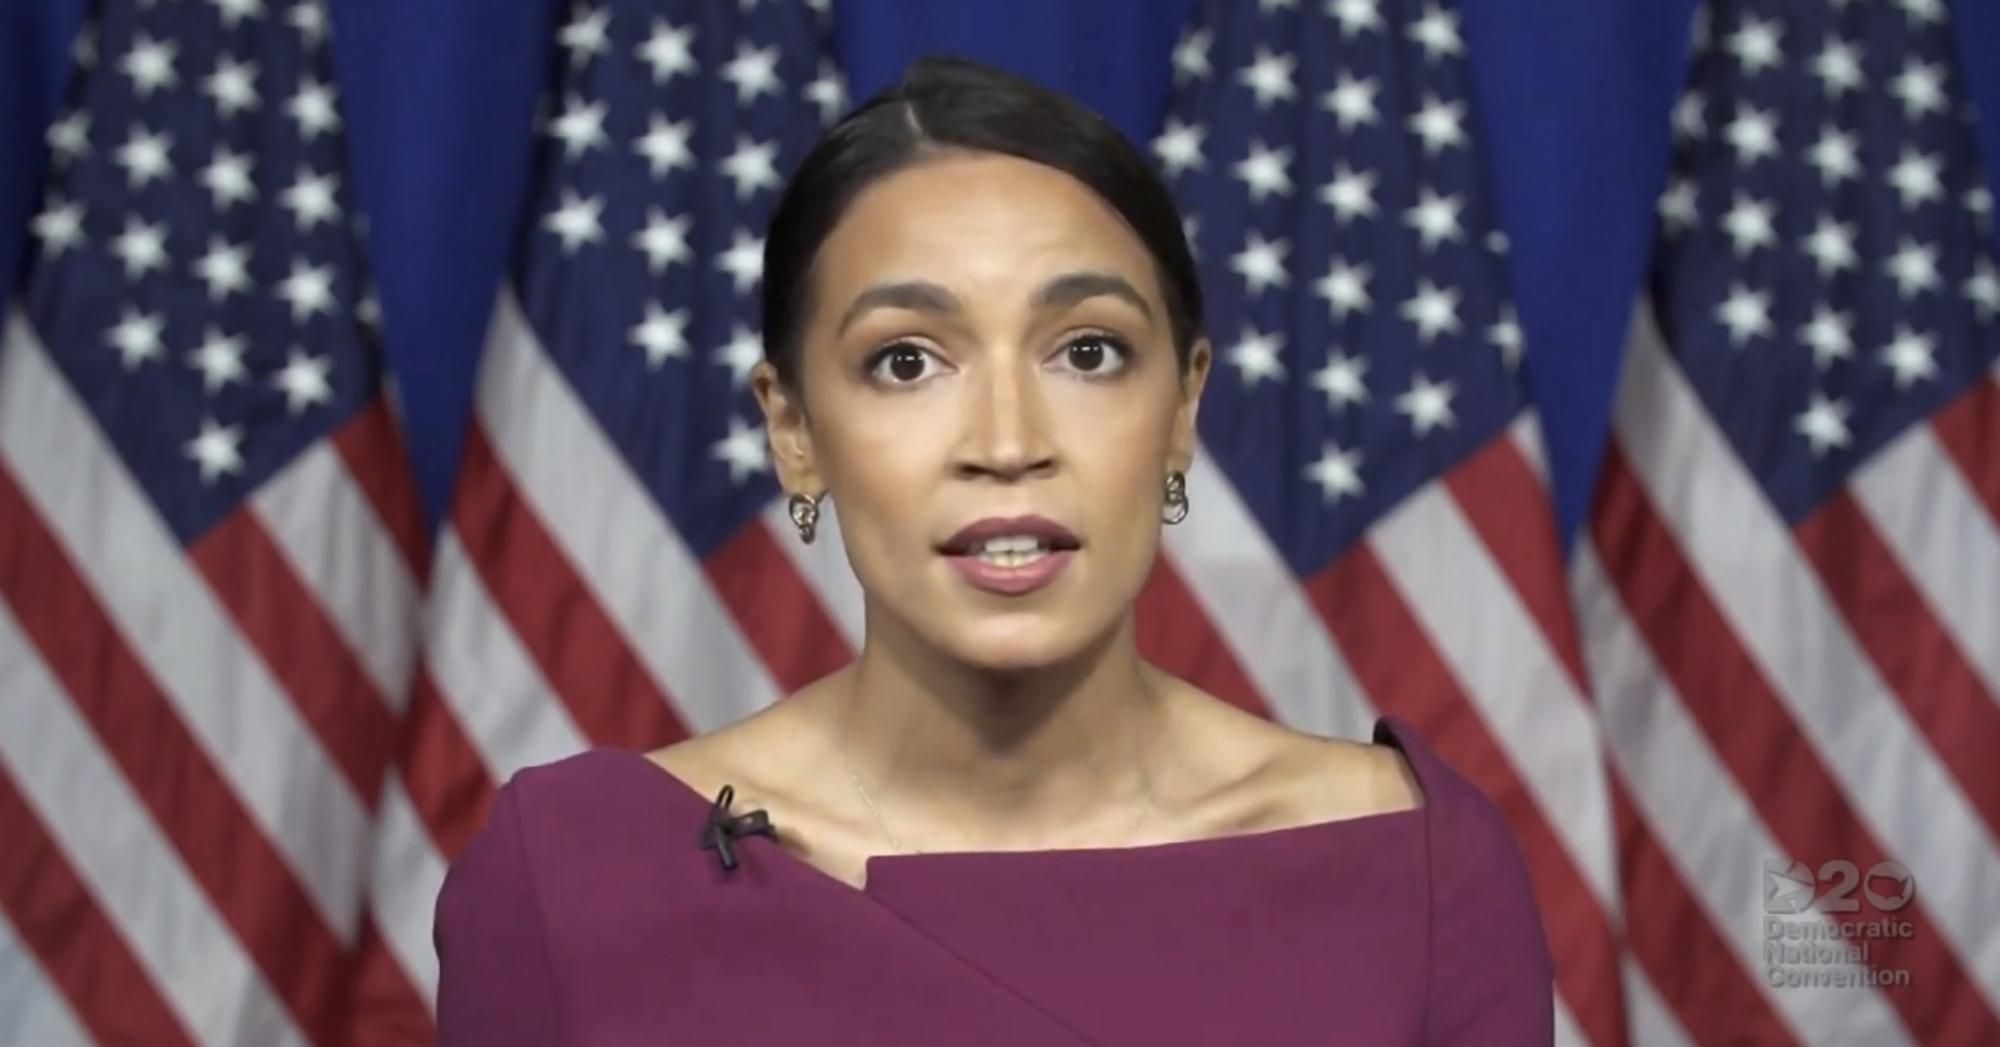 In this screenshot from the DNCC’s livestream of the 2020 Democratic National Convention, Rep. Alexandria Ocasio-Cortez (D-NY) addresses the virtual convention on August 18, 2020. The convention, which was once expected to draw 50,000 people to Milwaukee, Wisconsin, is now taking place virtually due to the coronavirus pandemic. (Photo: DNCC via Getty Images) (Photo by Handout/DNCC via Getty Images)